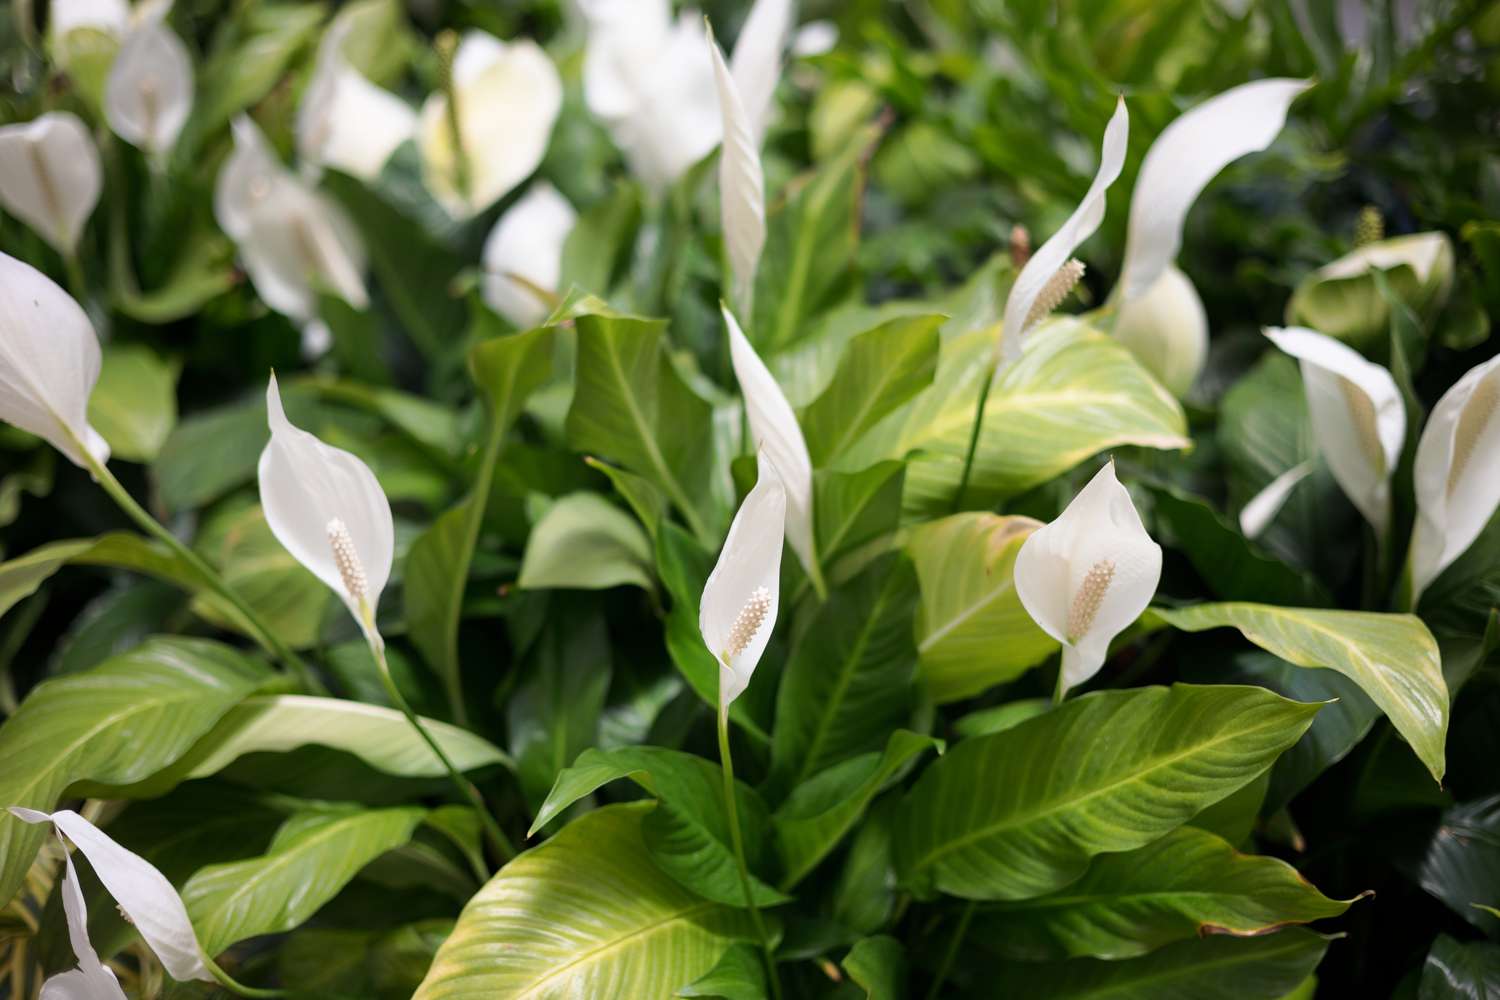 A close up of indoor houseplants featuring white lilies with green leaves.